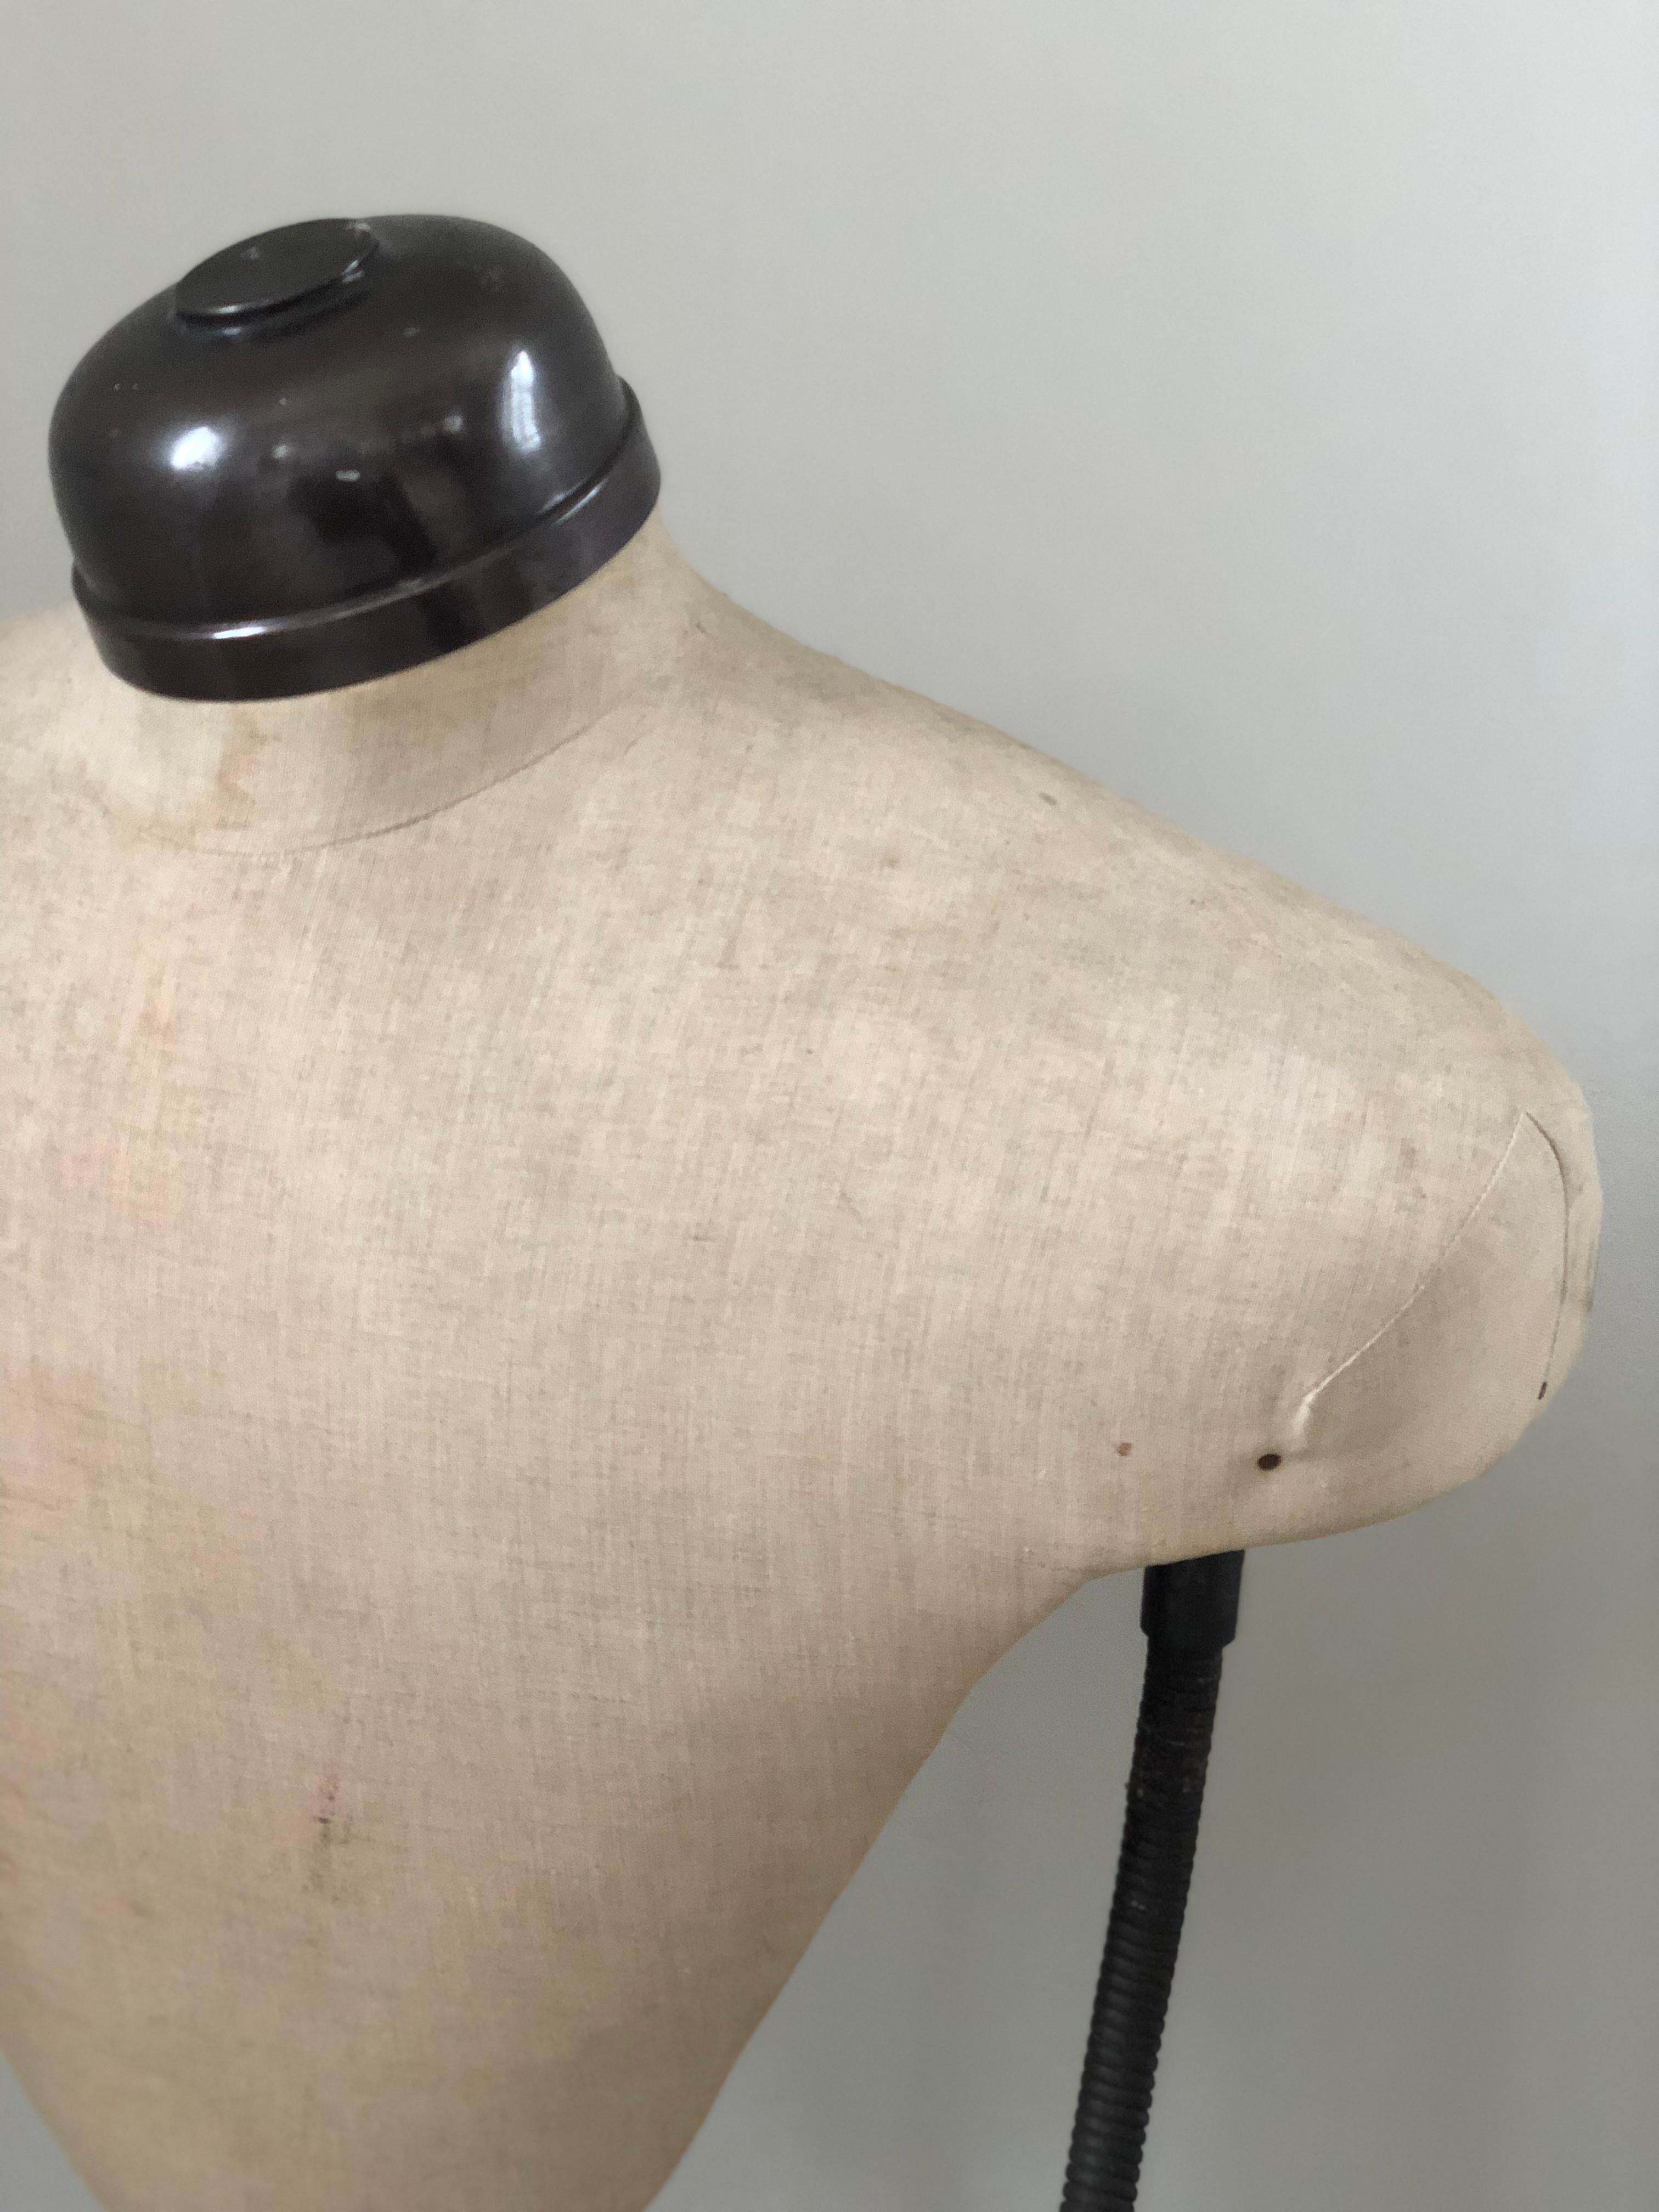 A vintage adjustable mannequin on a metal frame. Owned by a fashion store in Brussels, marked: Articles D'Etalages, A Delabye 17 Bd Poincaré Bruxelles. The history can be found.

Design of a sturdy torso dressed with linen and adjustable metal arms.